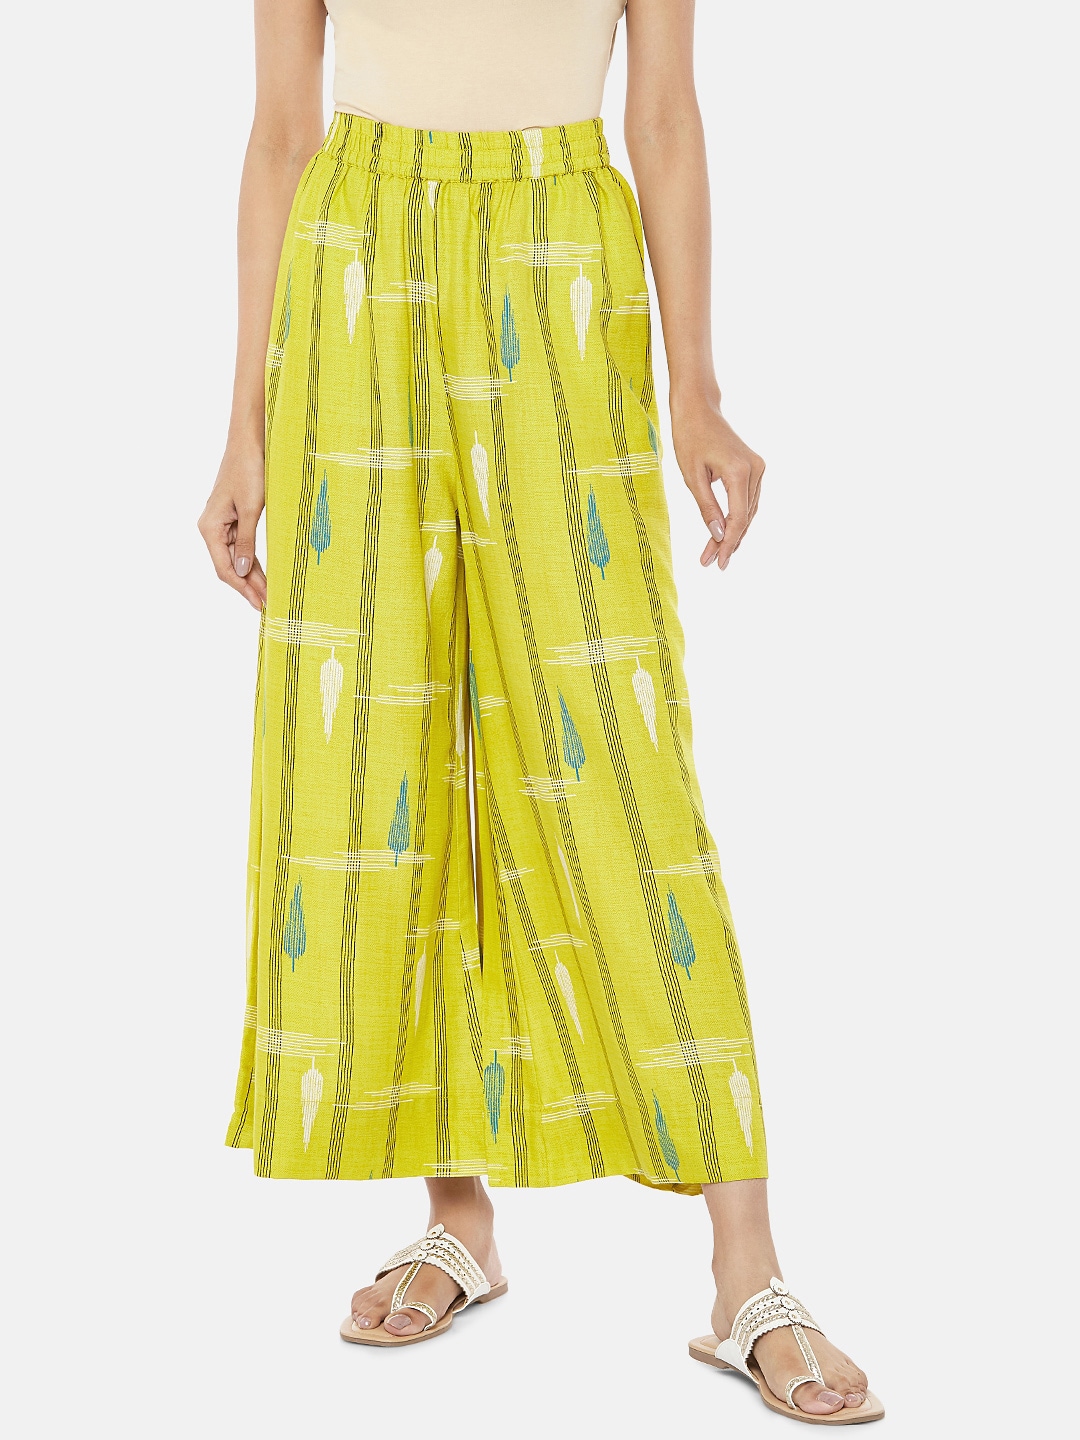 RANGMANCH BY PANTALOONS Women Lime Green Printed Wide Leg Palazzos Price in India